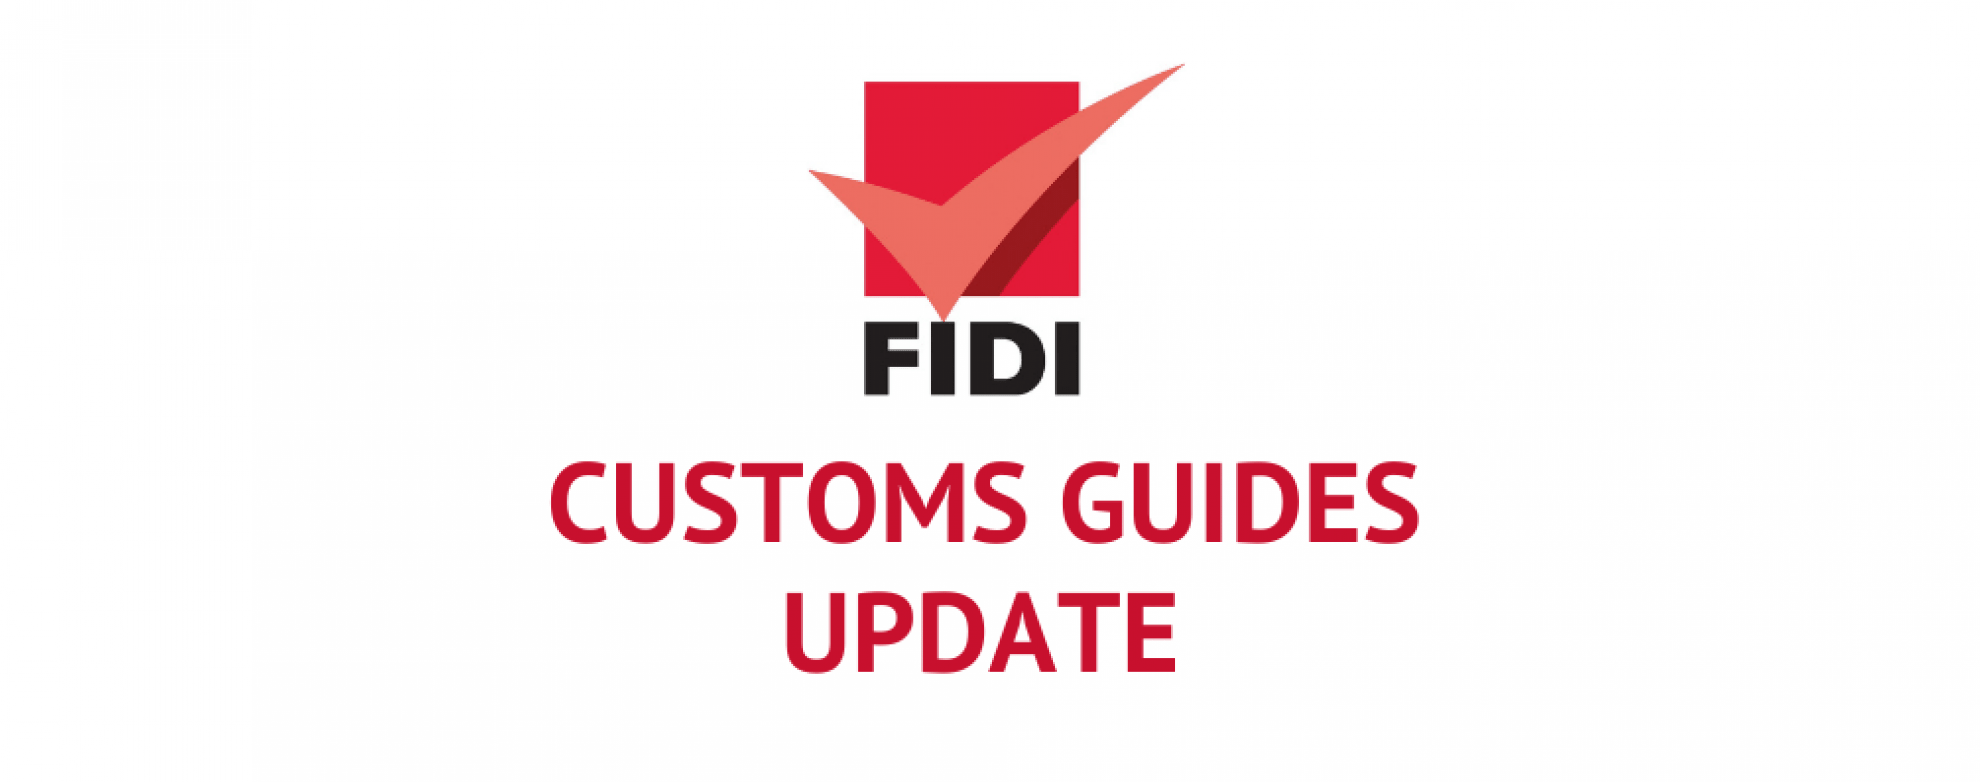 FIDI Custom Guides for more than 40 countries have been updated